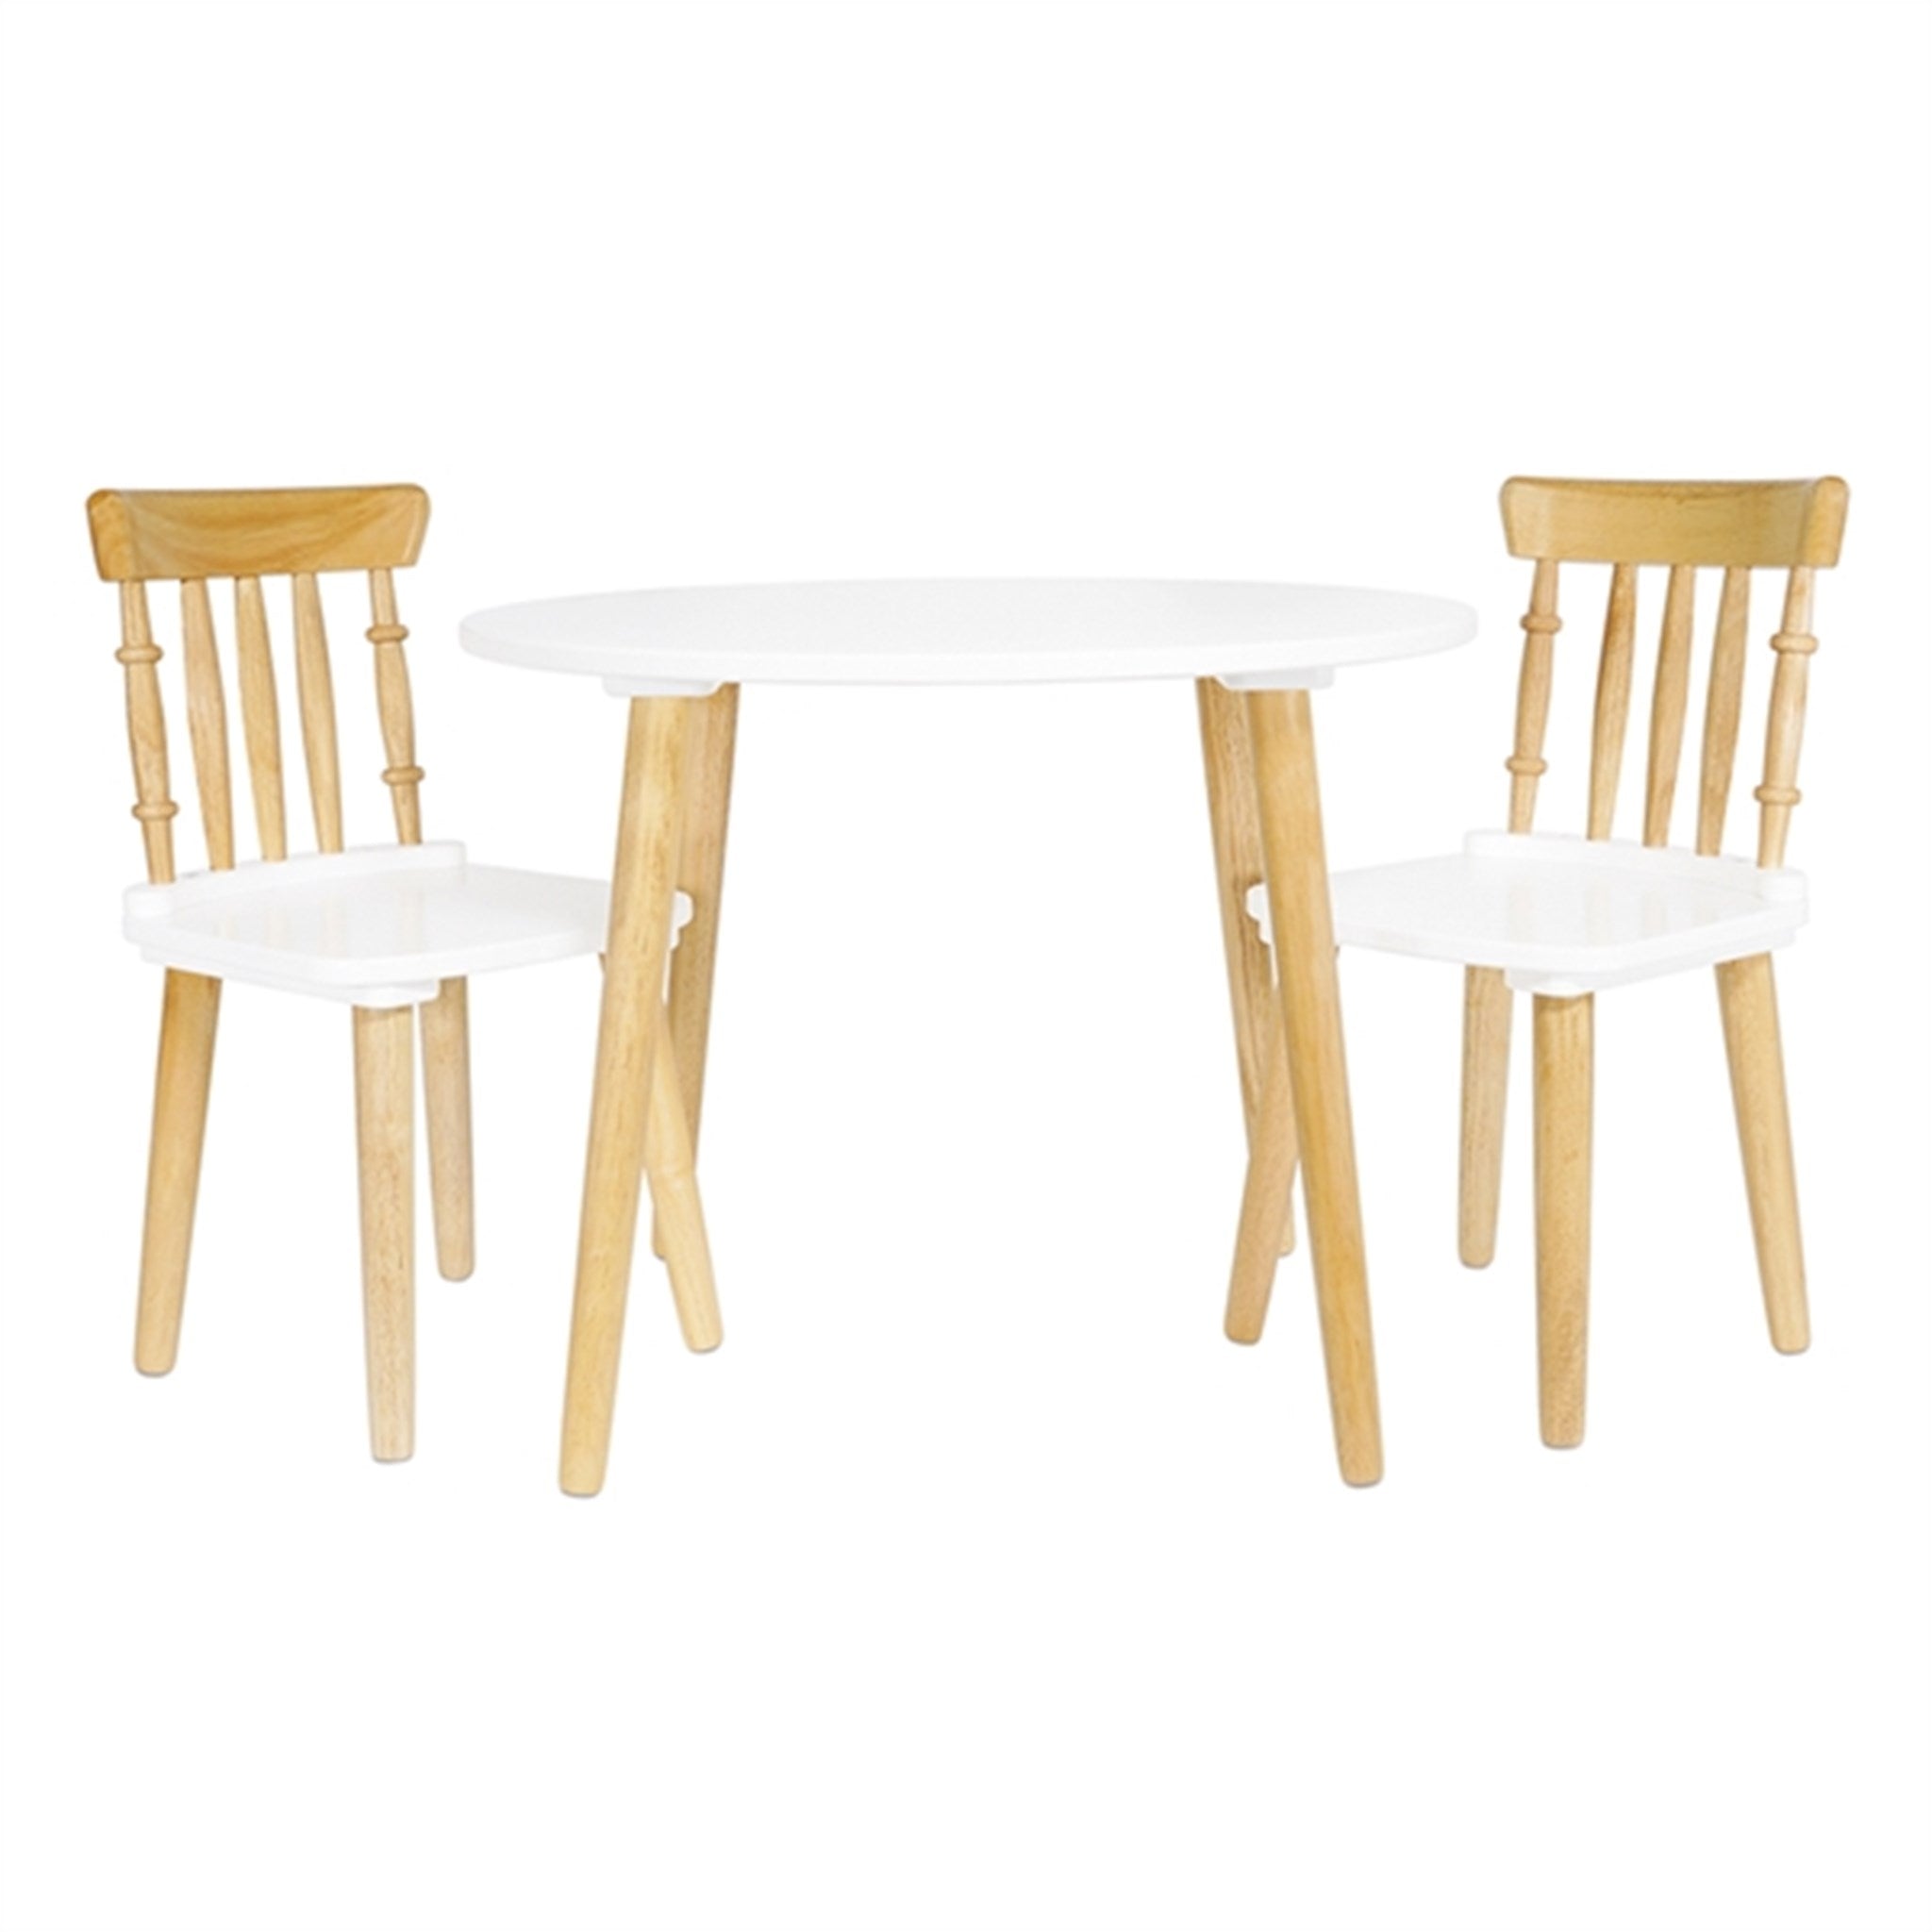 Le Toy Van Honeybake Table With 2 Chairs